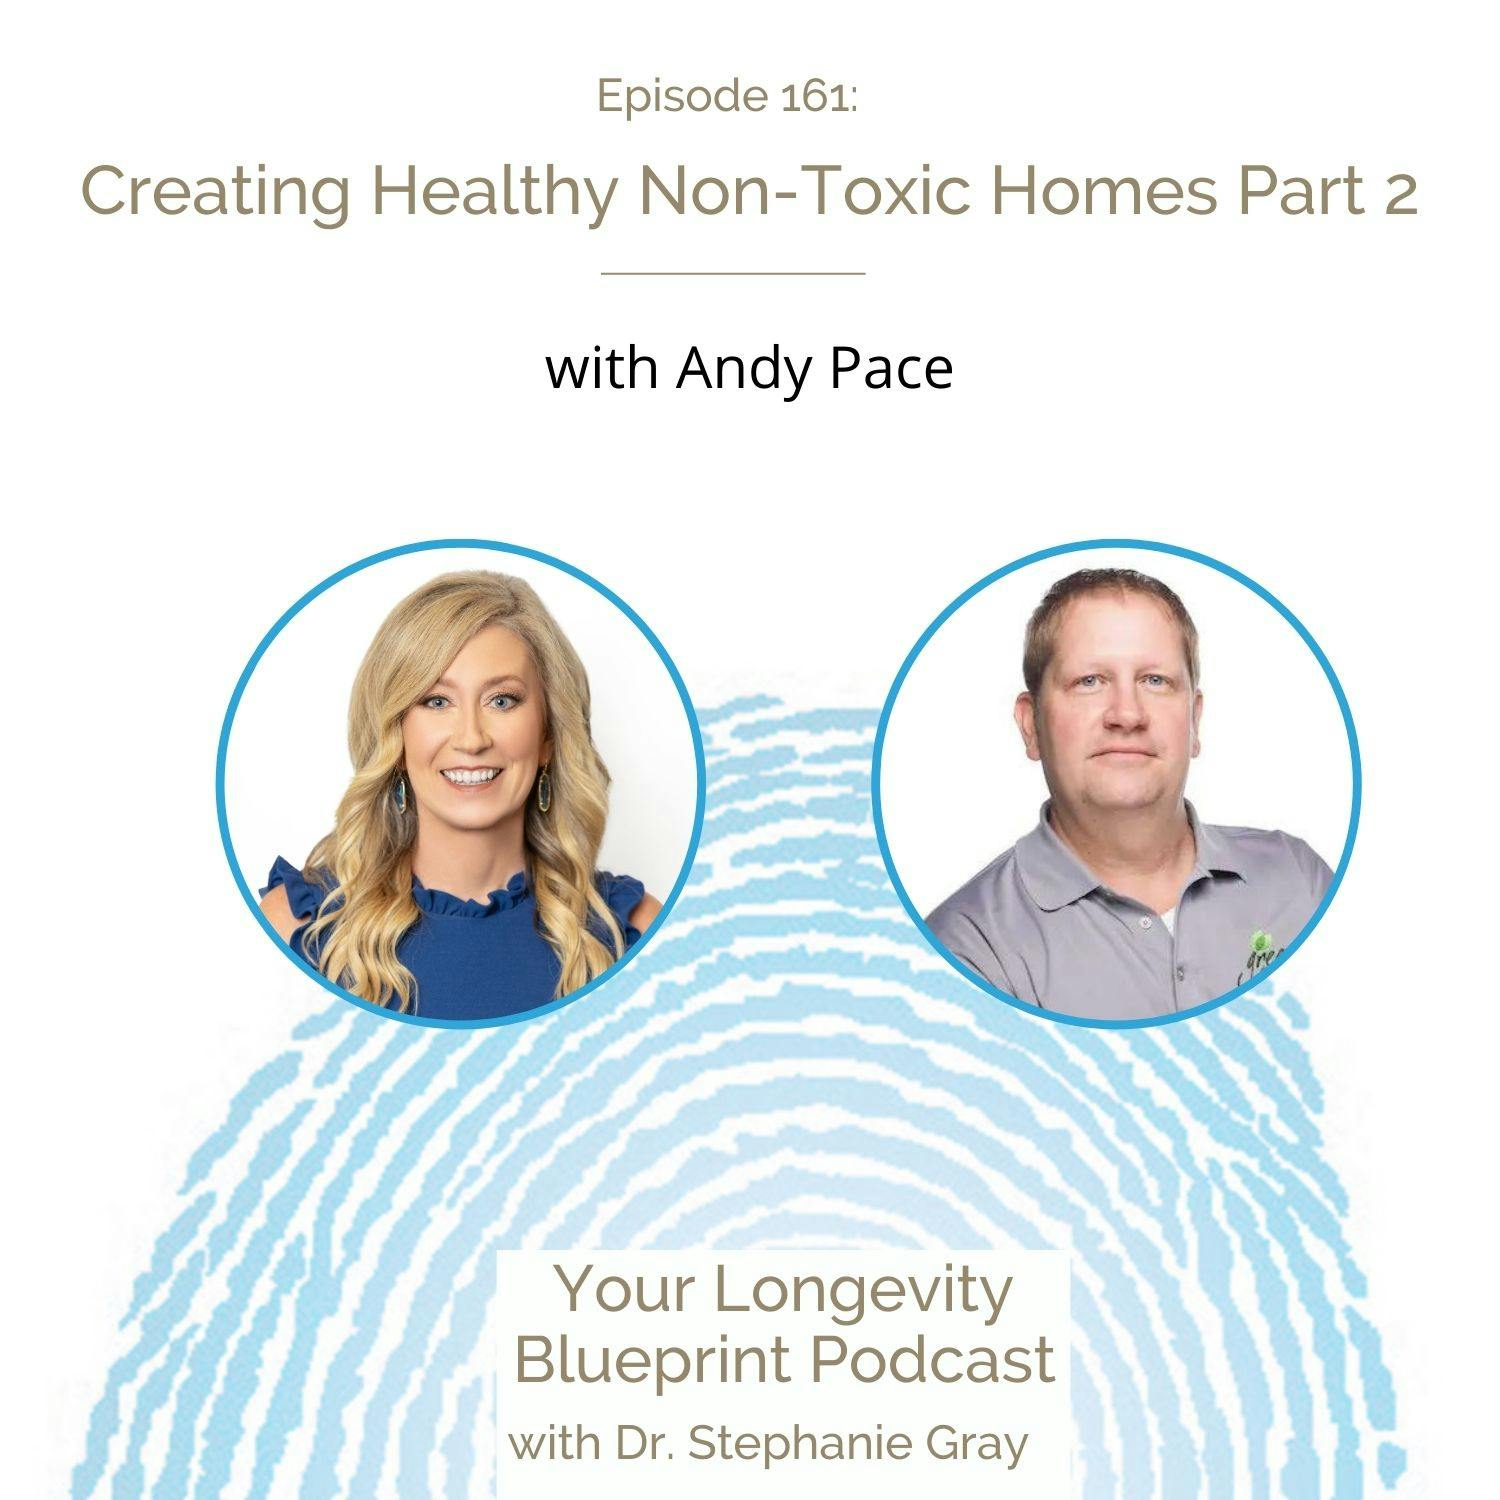 161: Creating Healthy Non-Toxic Homes Part 2 with Andy Pace